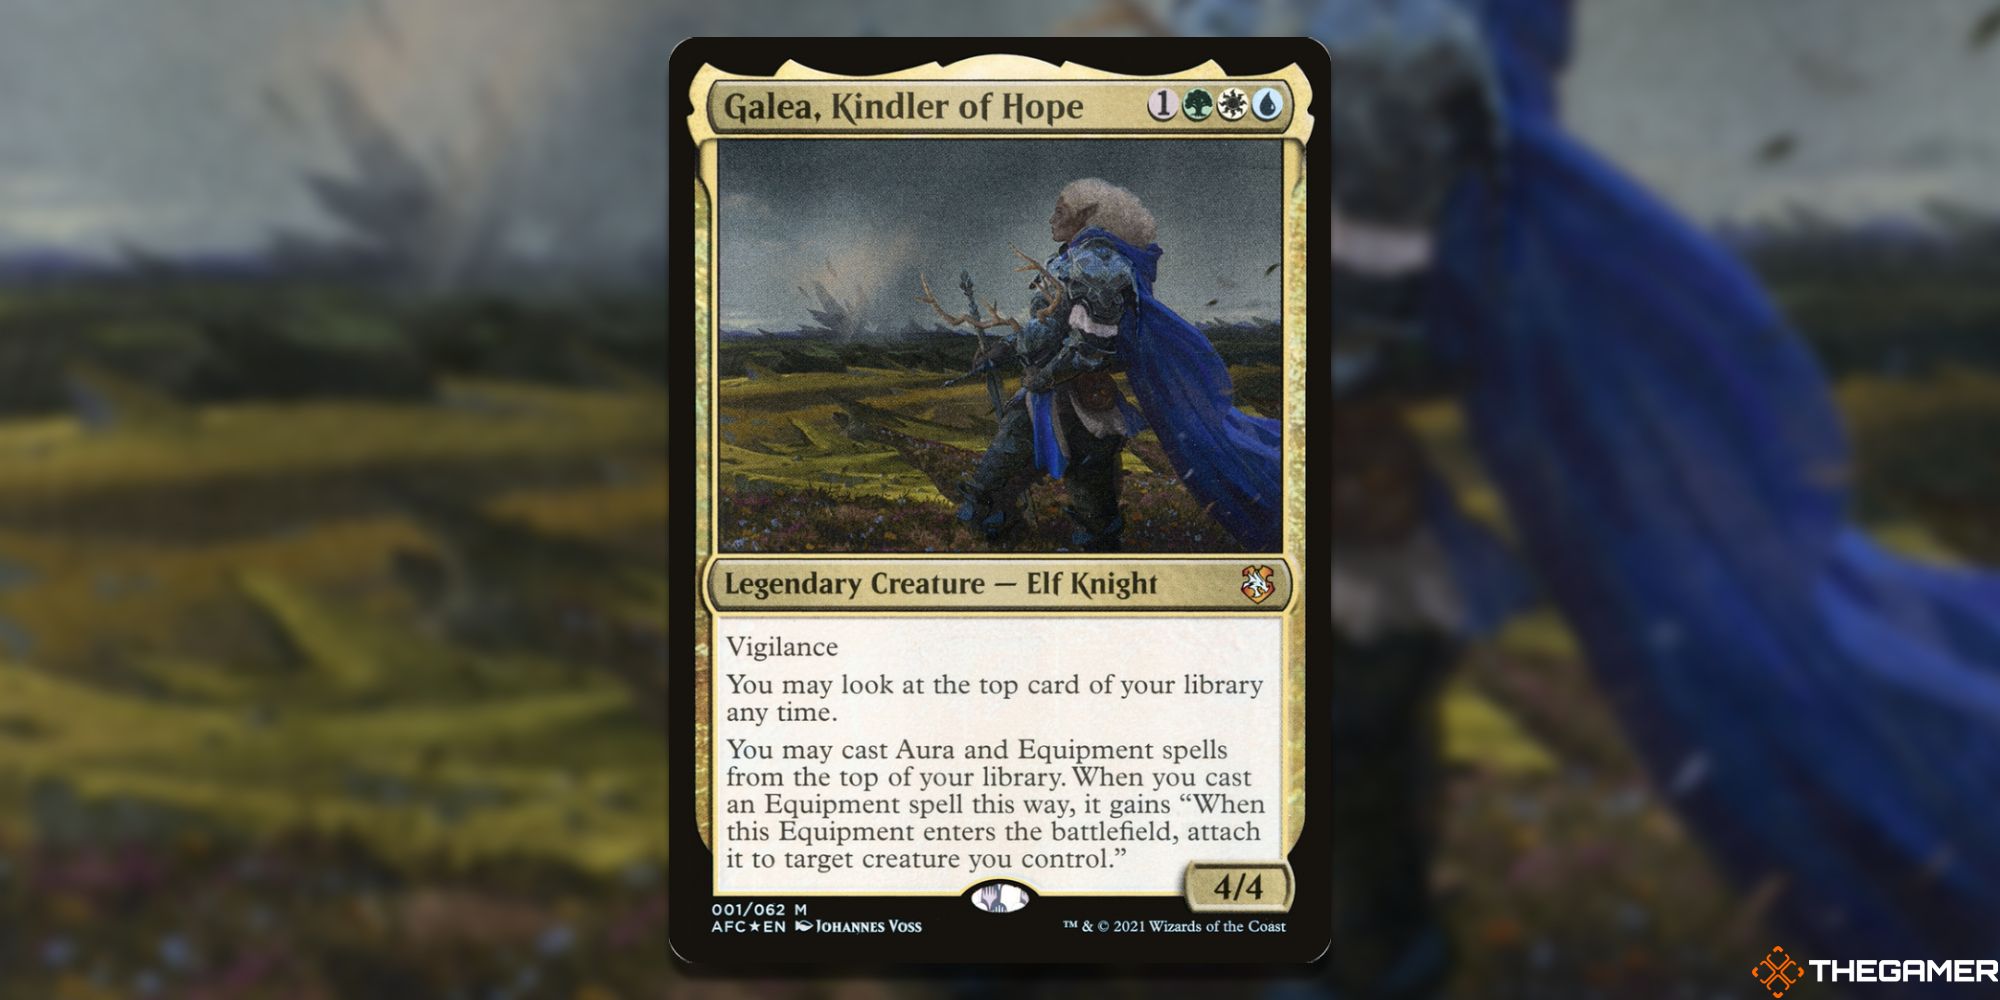 Image of the Galea, Kindler of Hope card in Magic: The Gathering, with art by Johannes Voss